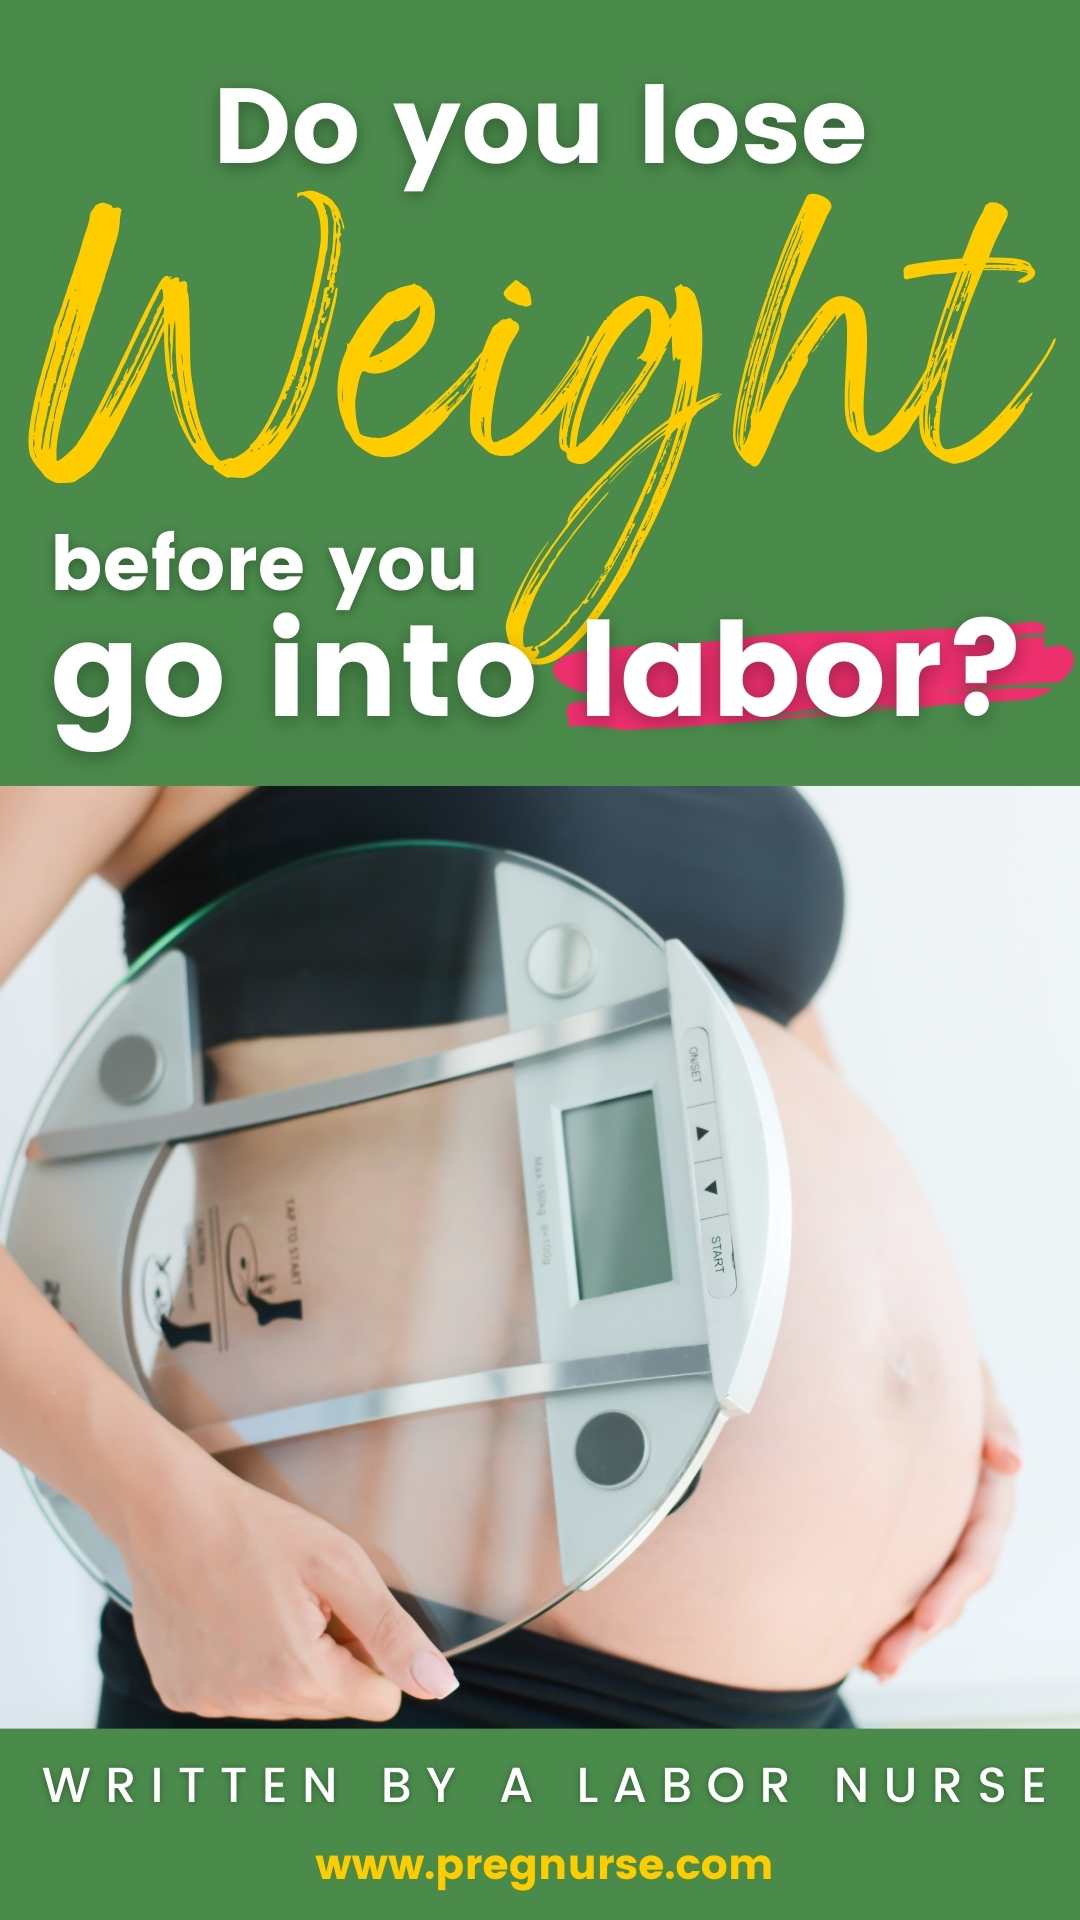 There's a lot of conflicting information out there about whether or not you lose weight before labor. So we asked an expert to clear things up for us. Read on to find out what you can expect in the weeks leading up to your delivery.